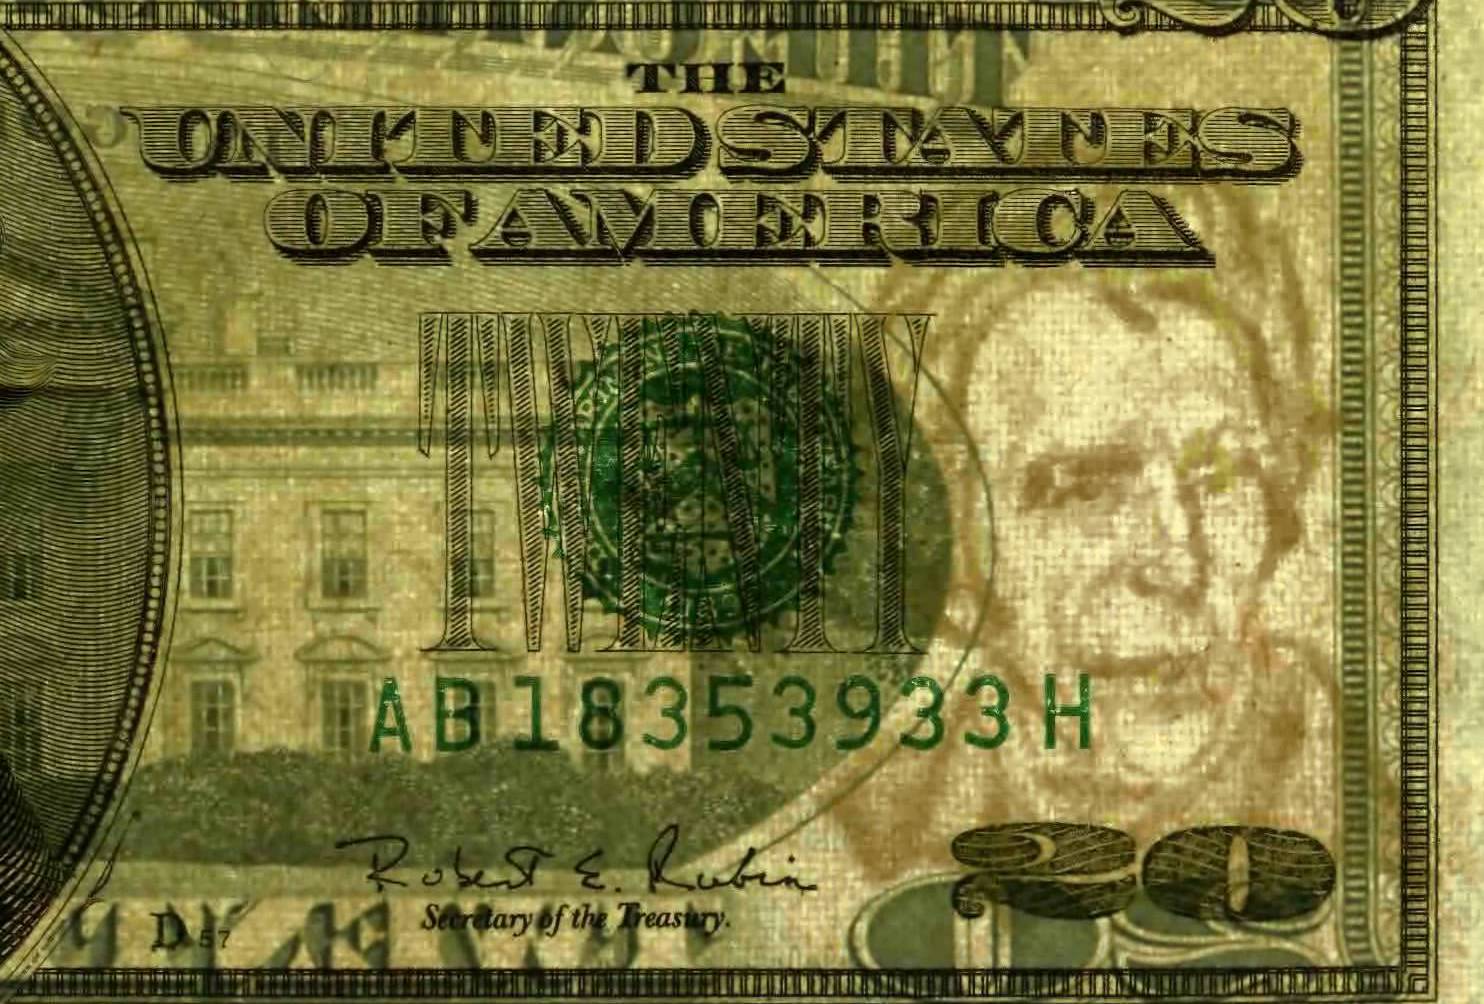 Us currency. Currency АБУЗ. Зеленые Баксы, гринбеки картинки. Money watermark. AFN currency.